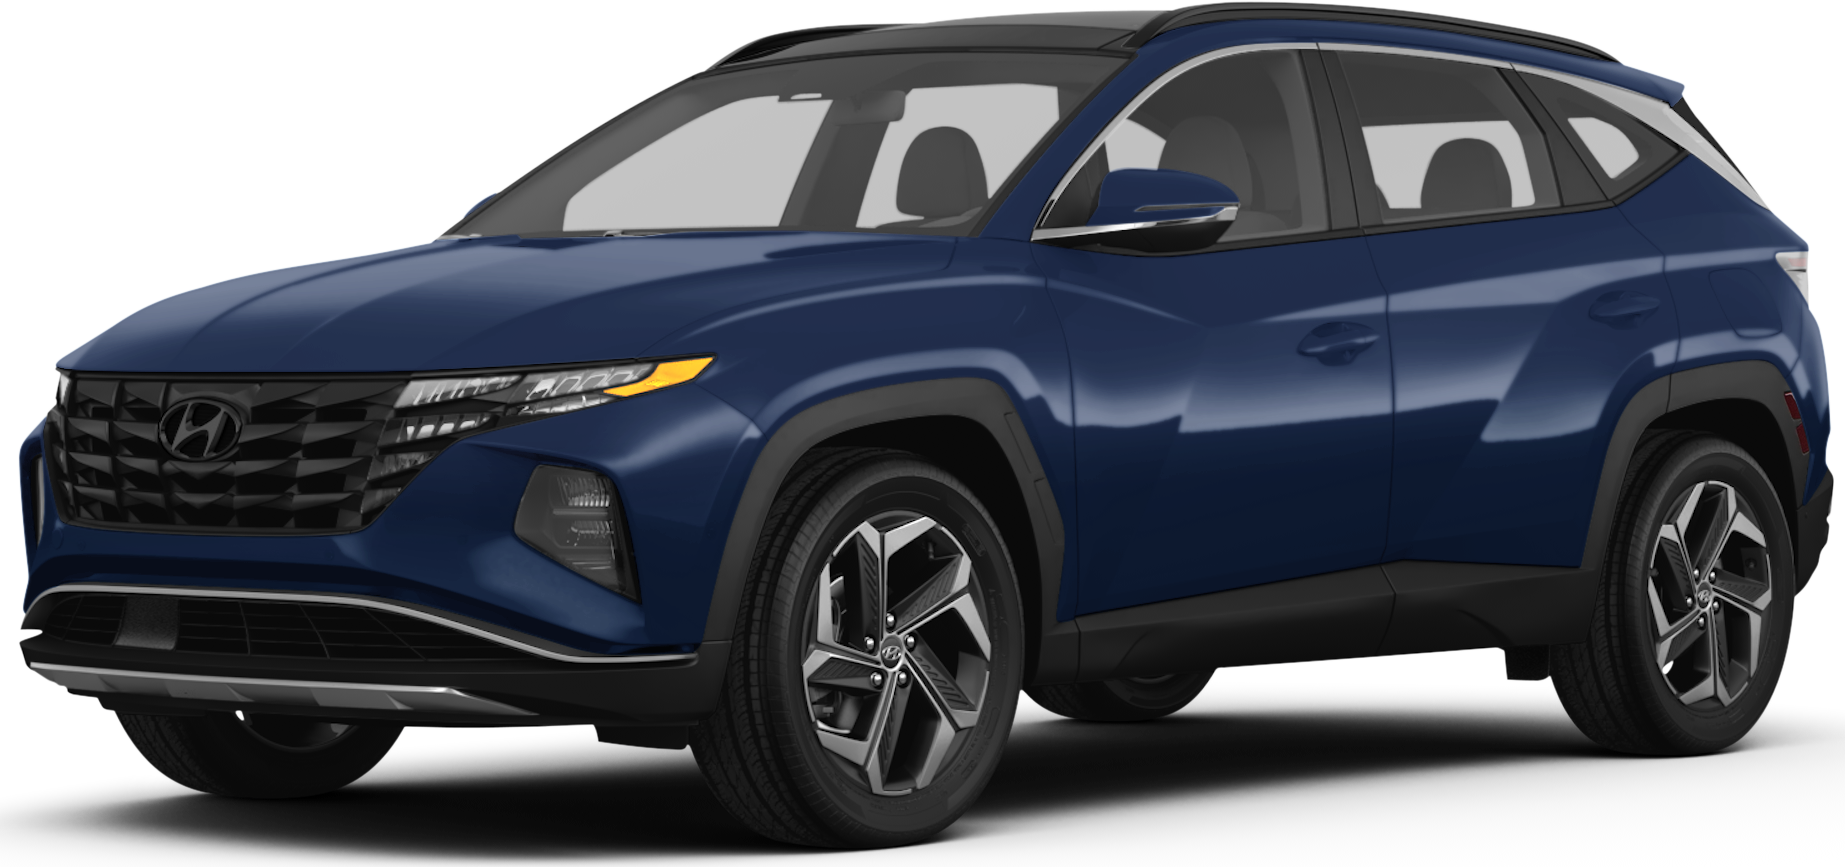 https://file.kelleybluebookimages.com/kbb/base/evox/CP/52564/2024-Hyundai-Tucson%20Plug-in%20Hybrid-front_52564_032_1845x867_PS8_cropped.png